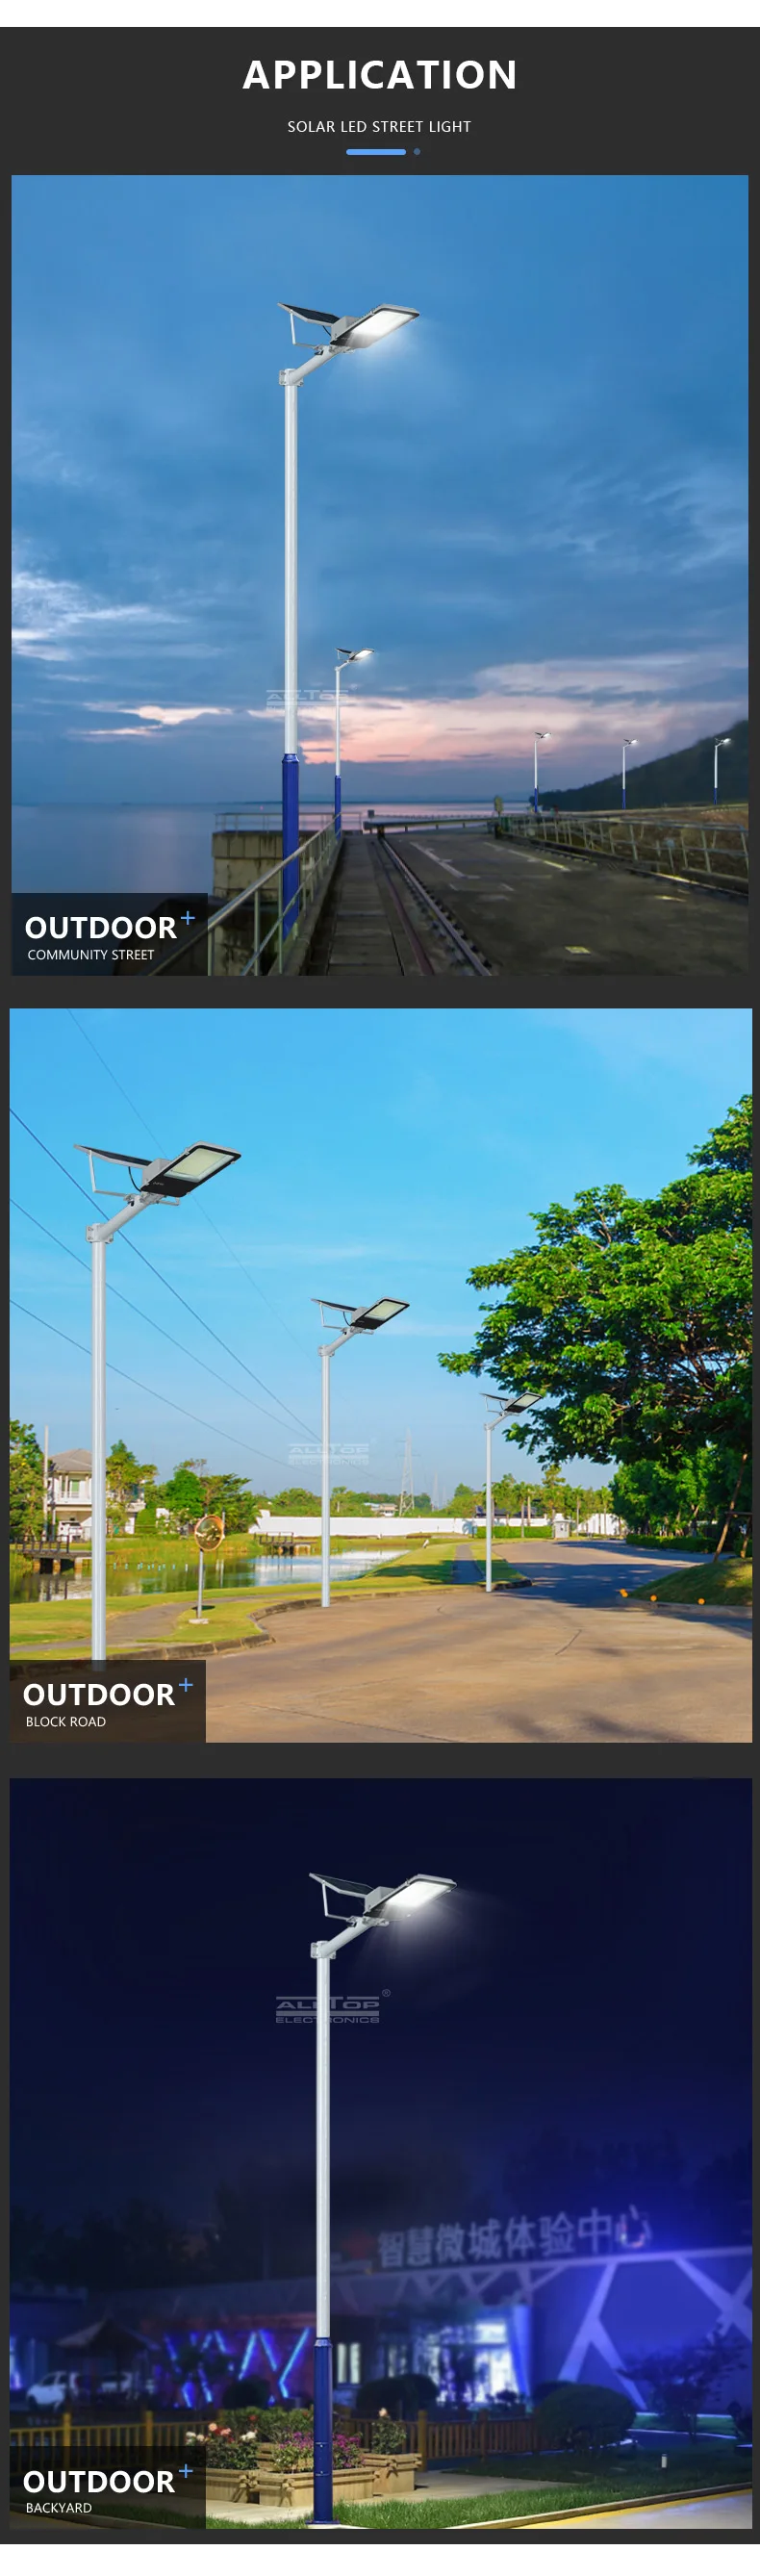 ALLTOP Best selling waterproof ip65 200w outdoor lighting solar lamp led street with remote control